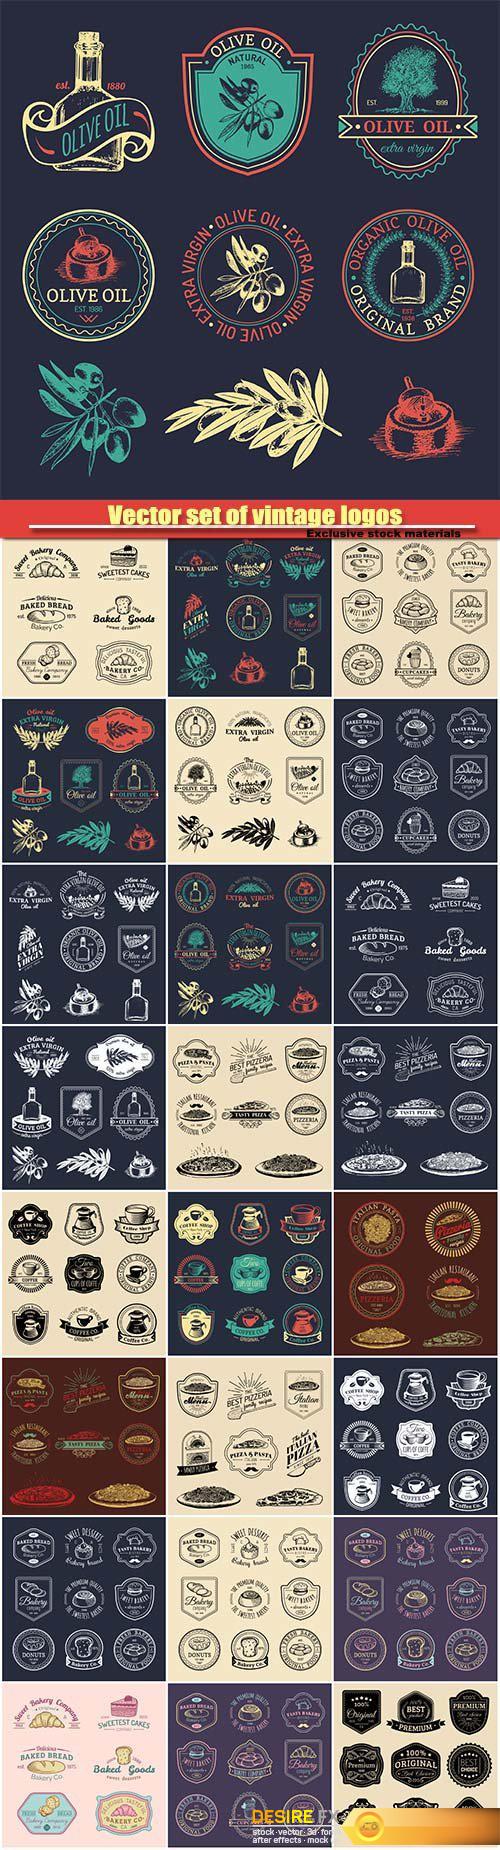 Vector set of vintage logos, restaurant icons, emblems collection